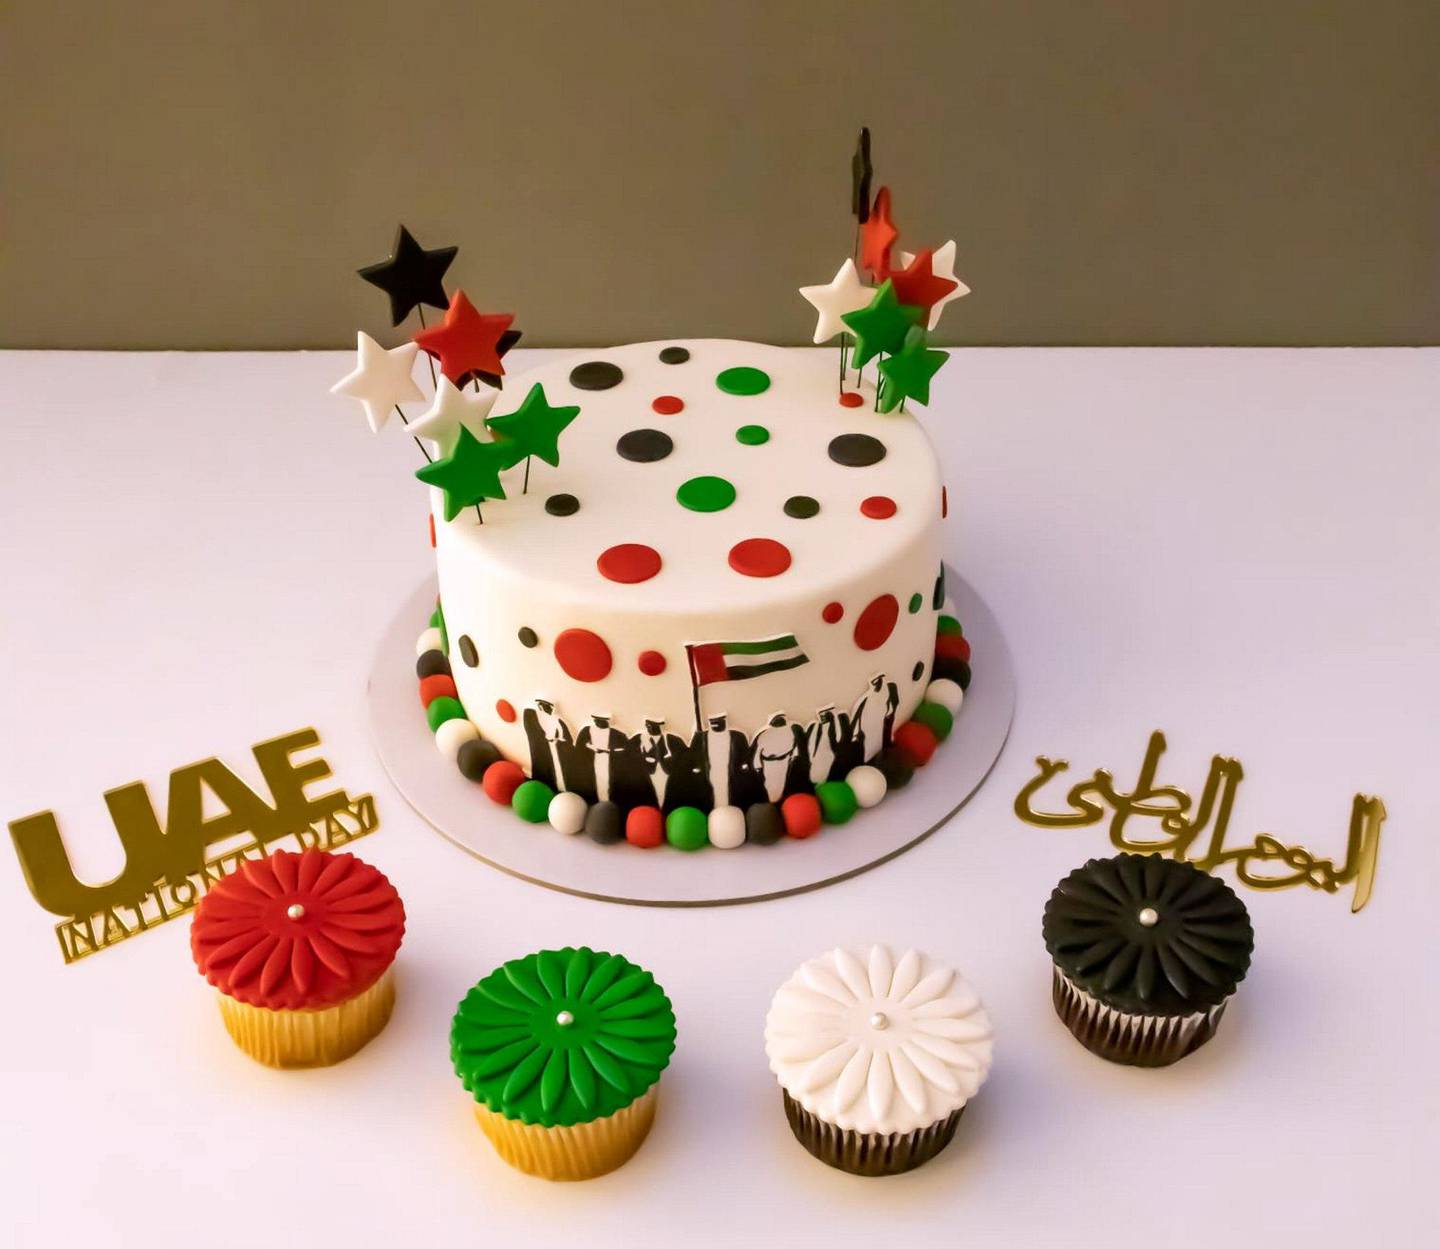 National Day-themed cakes and cupcakes at Mister Baker